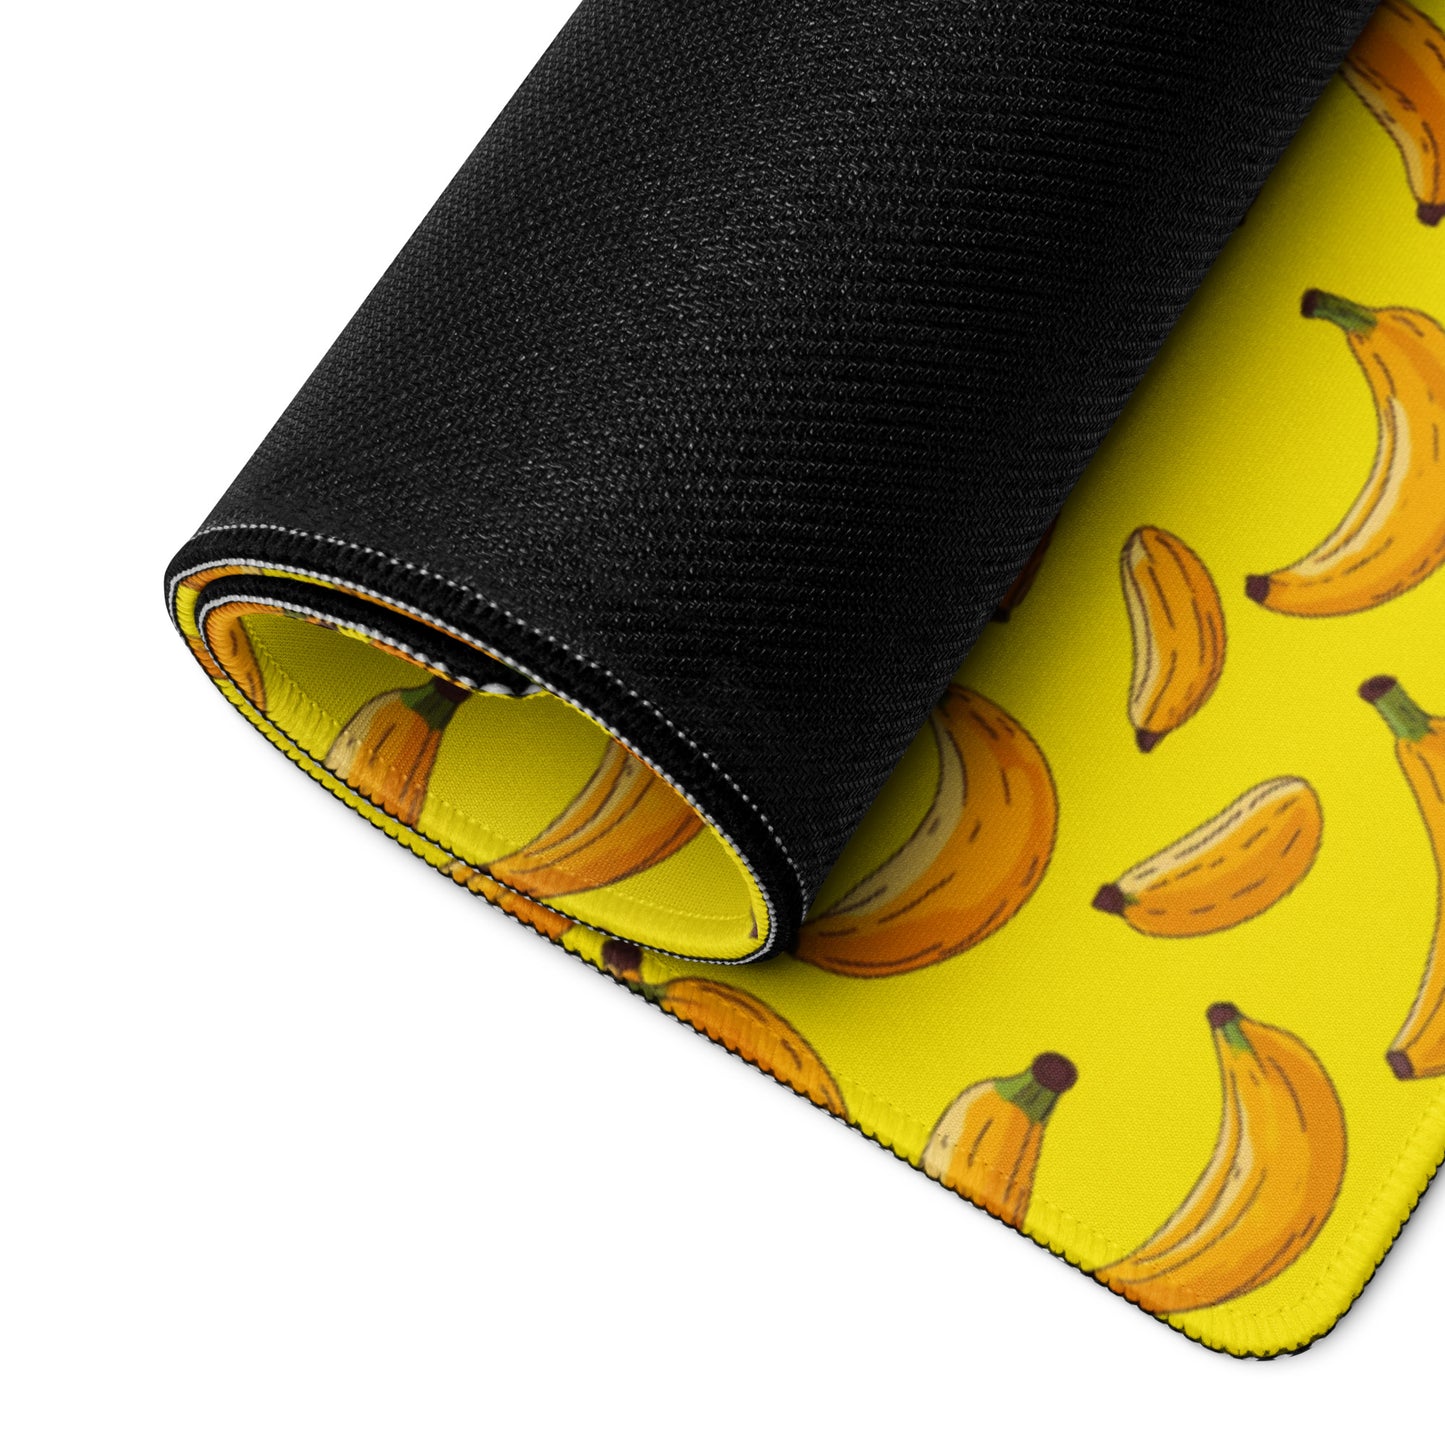 A 36" x 18" desk pad with bananas all over it rolled up. Yellow in color.